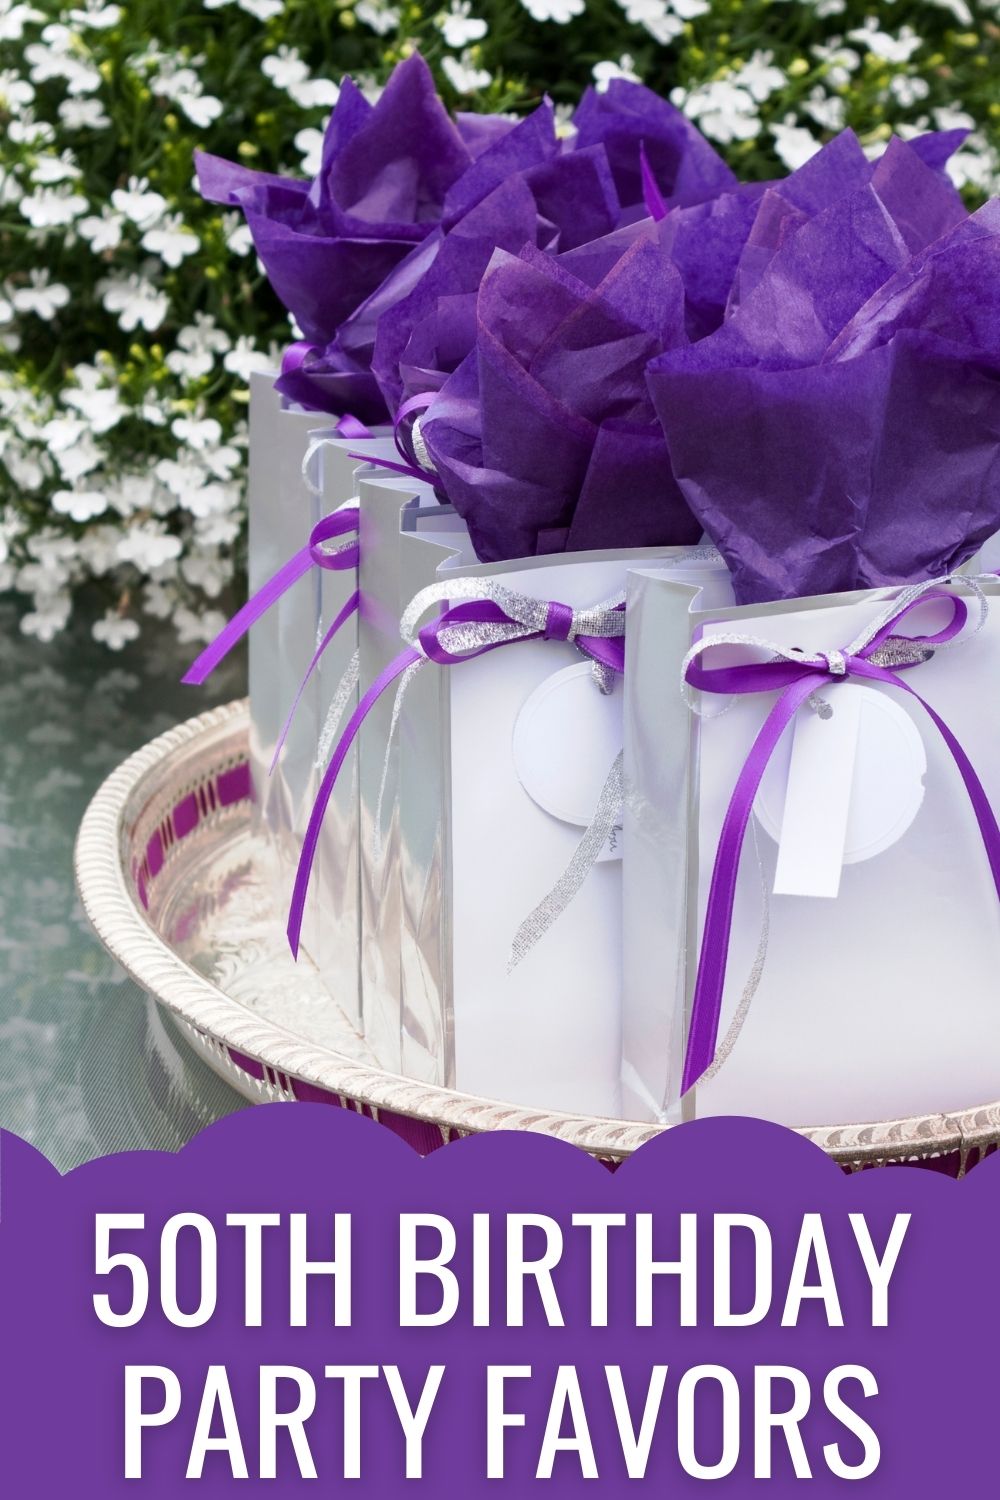 purplr and white 50th birthday party favors